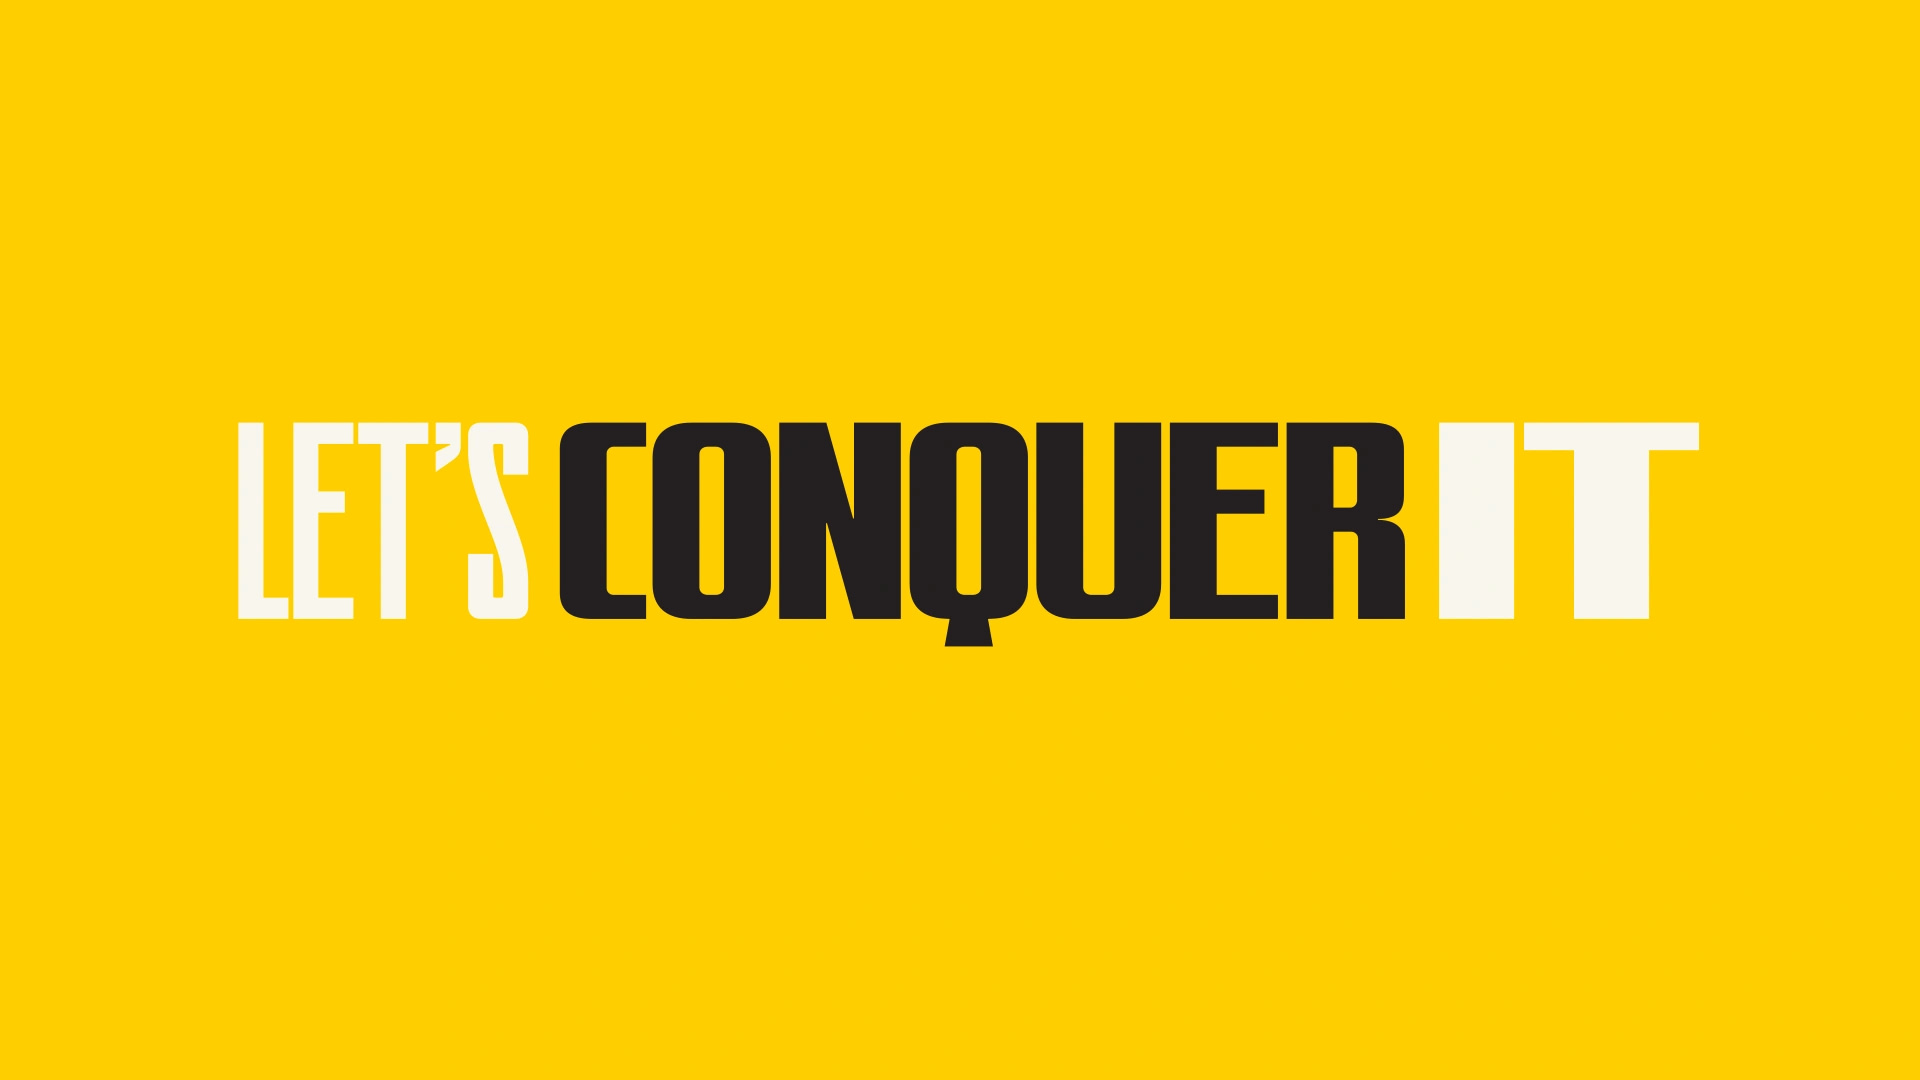 Typography composition saying "Let's conquer it" in the center.